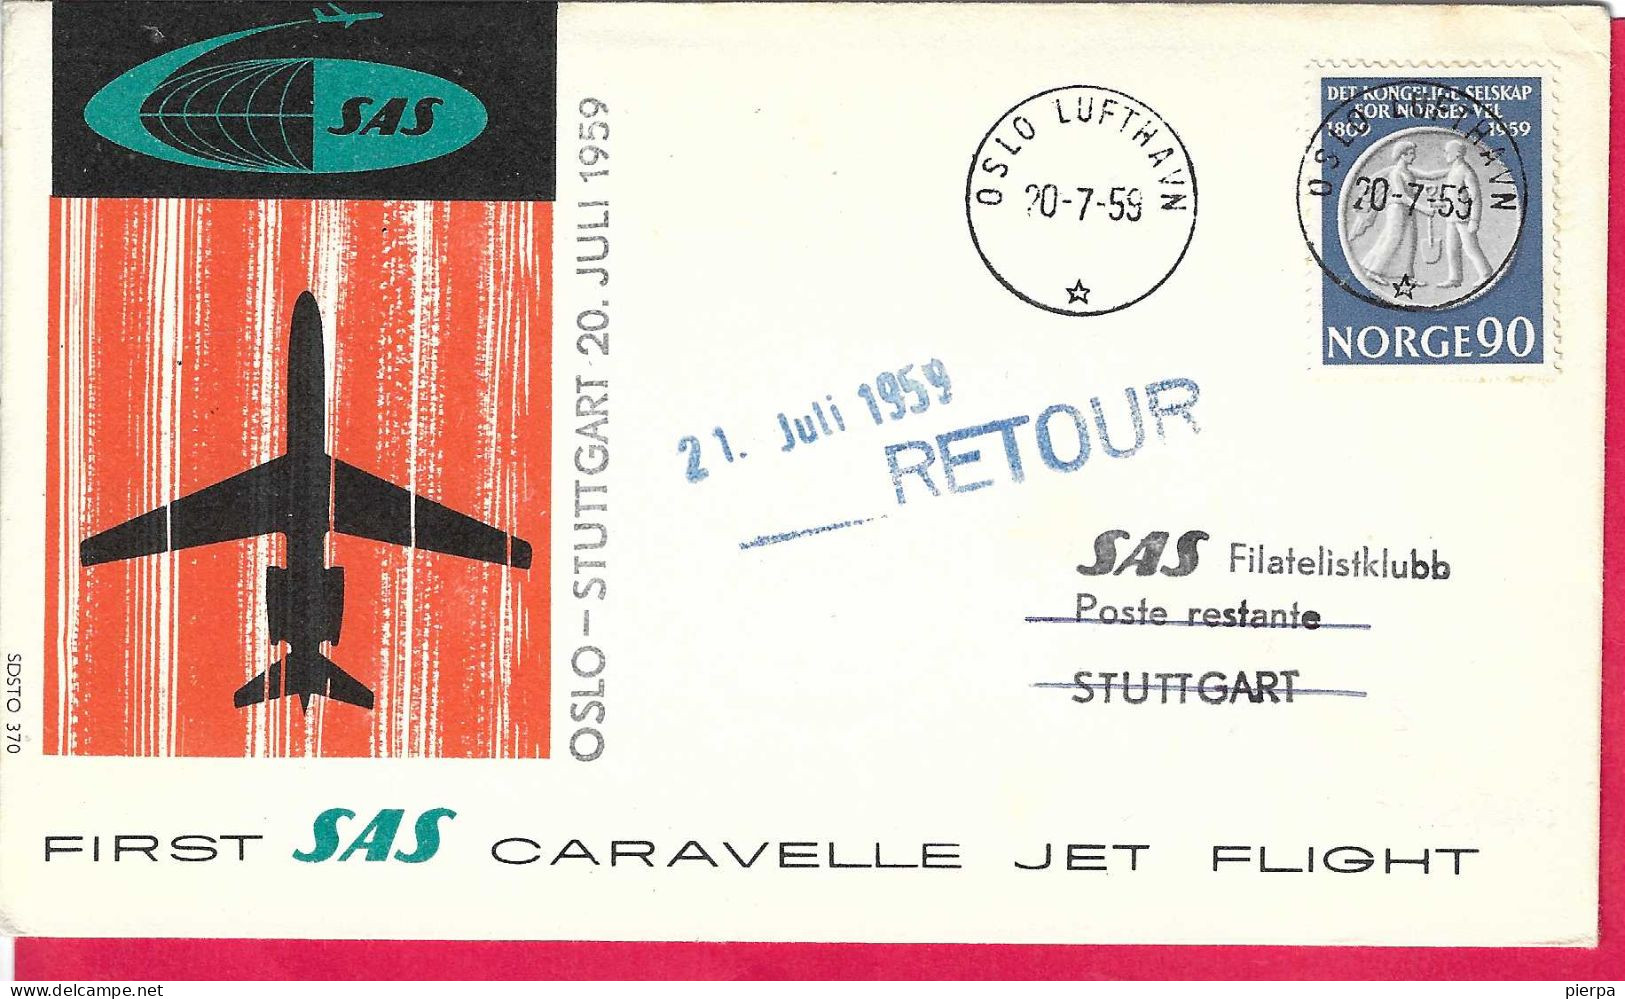 NORGE - FIRST SAS CARAVELLE FLIGHT - FROM OSLO TO STUTTGART *20.7.59* ON OFFICIAL COVER - Storia Postale